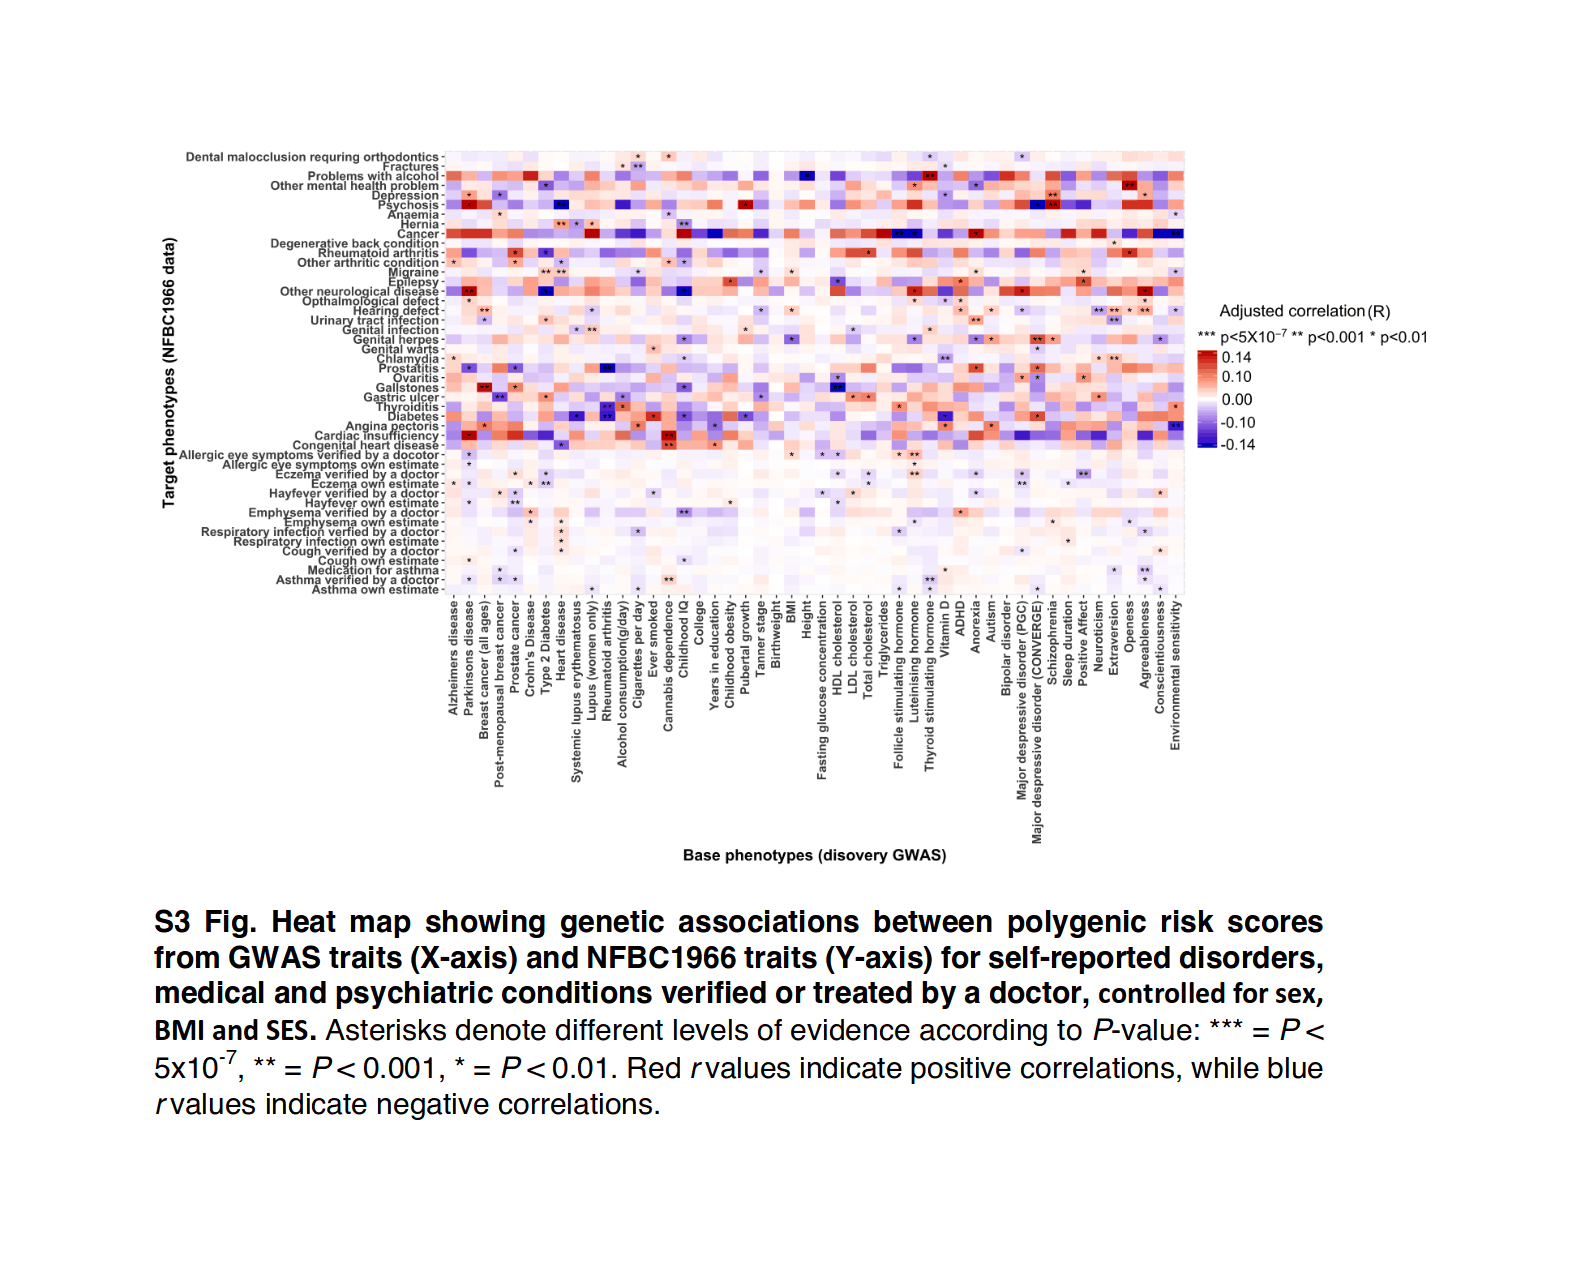 Socrates et al 2017: “Figure 3. Heat map showing genetic associations between polygenic risk scores from GWAS traits (x-axis) and NFBC1966 traits (y-axis) for self-reported disorders, medical and psychiatric conditions verified or treated by a doctor, controlled for sex, BMI, and SES”